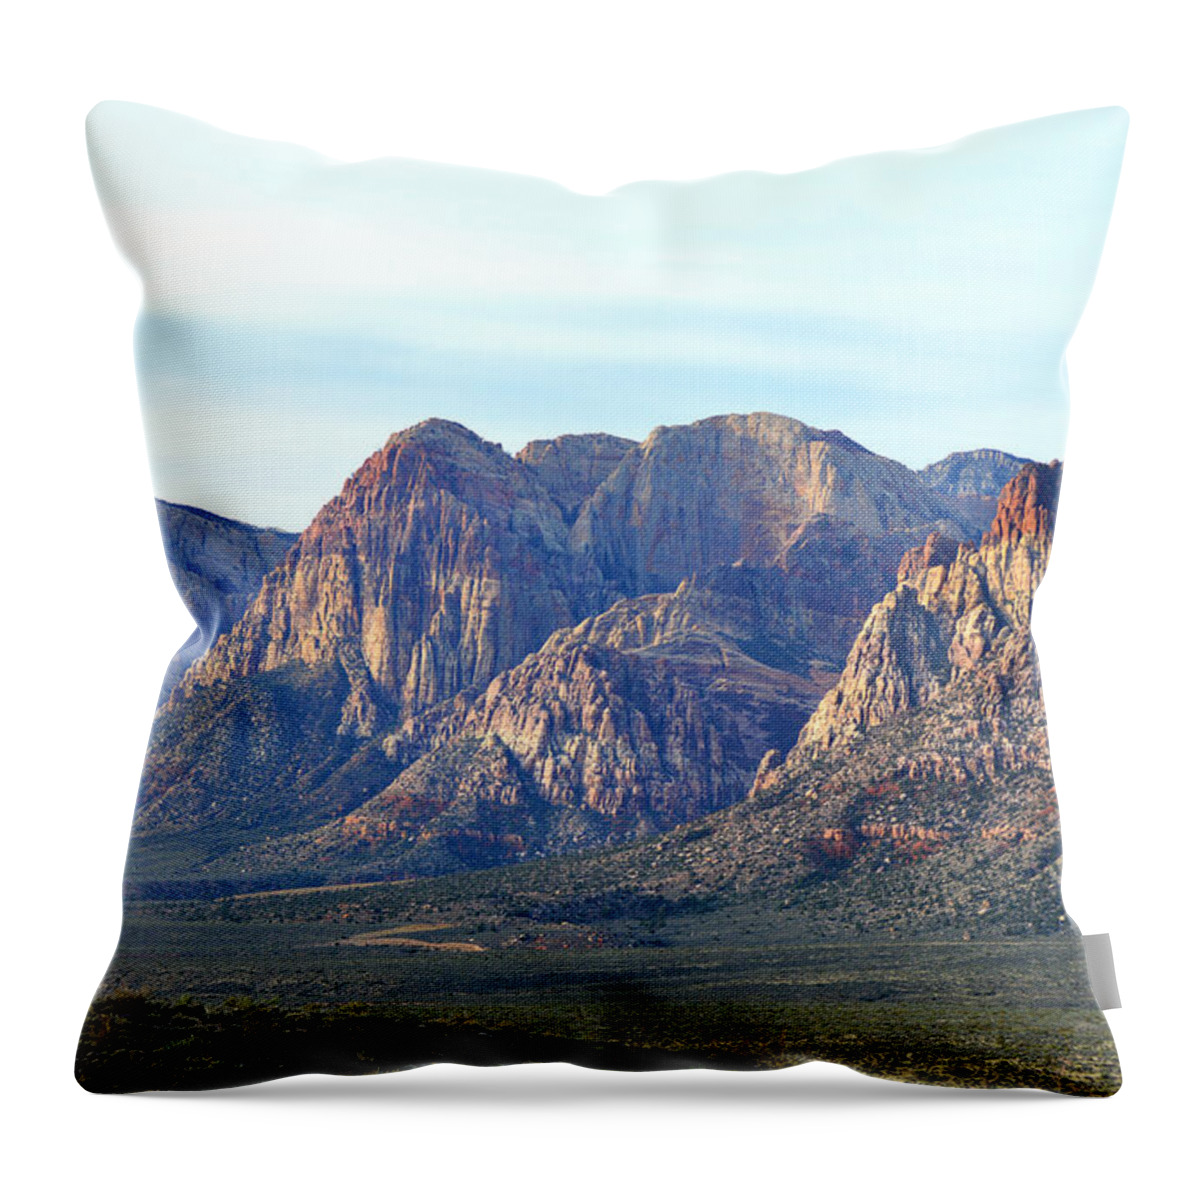 Red Rock Canyon Throw Pillow featuring the photograph Red Rock Canyon - Scale by Glenn McCarthy Art and Photography